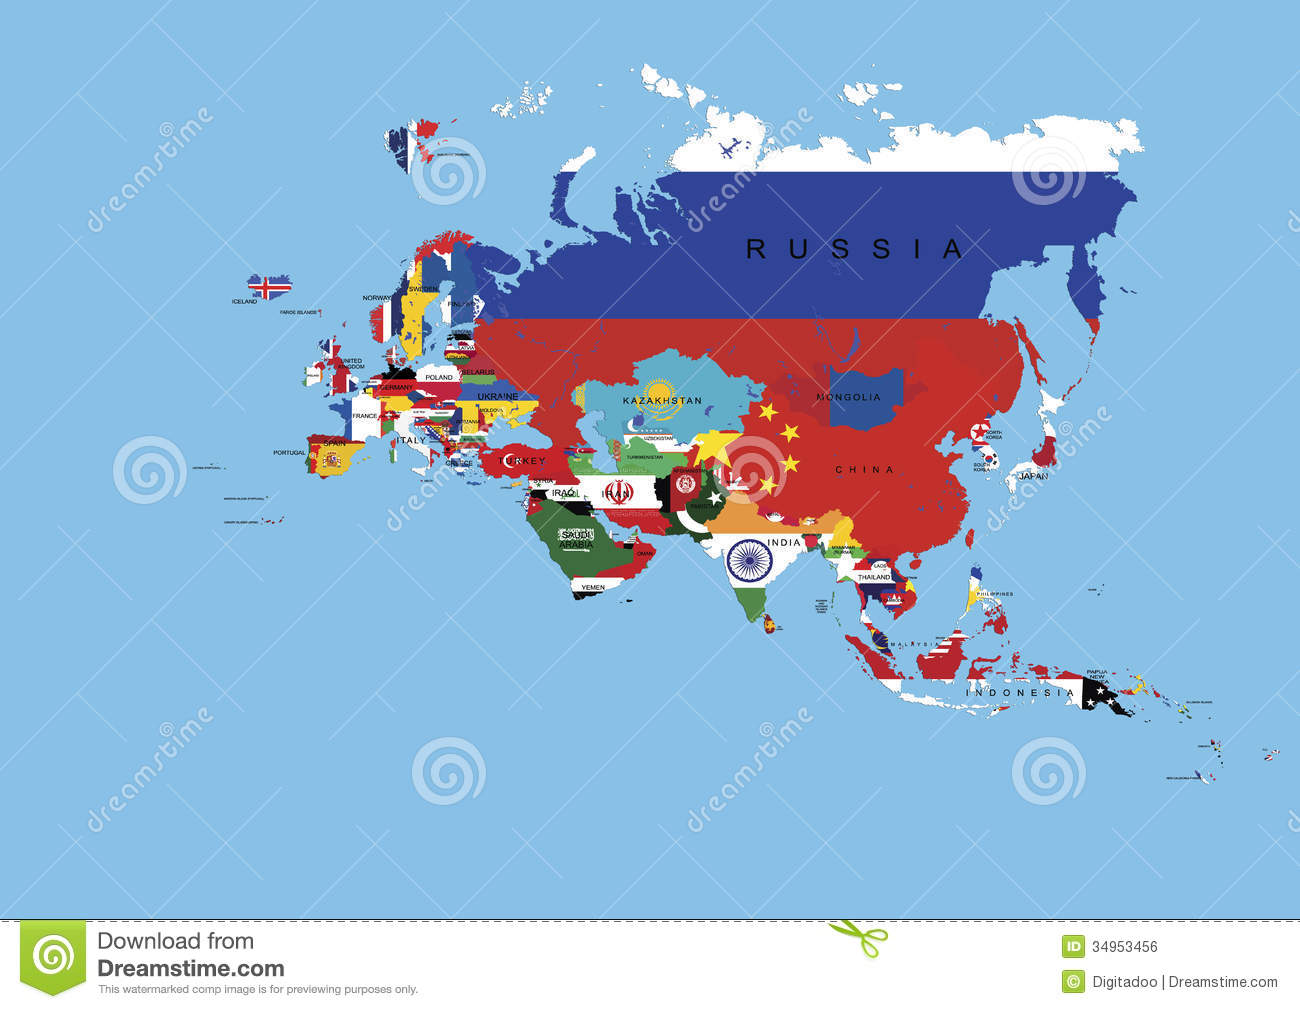 Royalty Free Stock Image  Europe Asia Flags Background Map And State